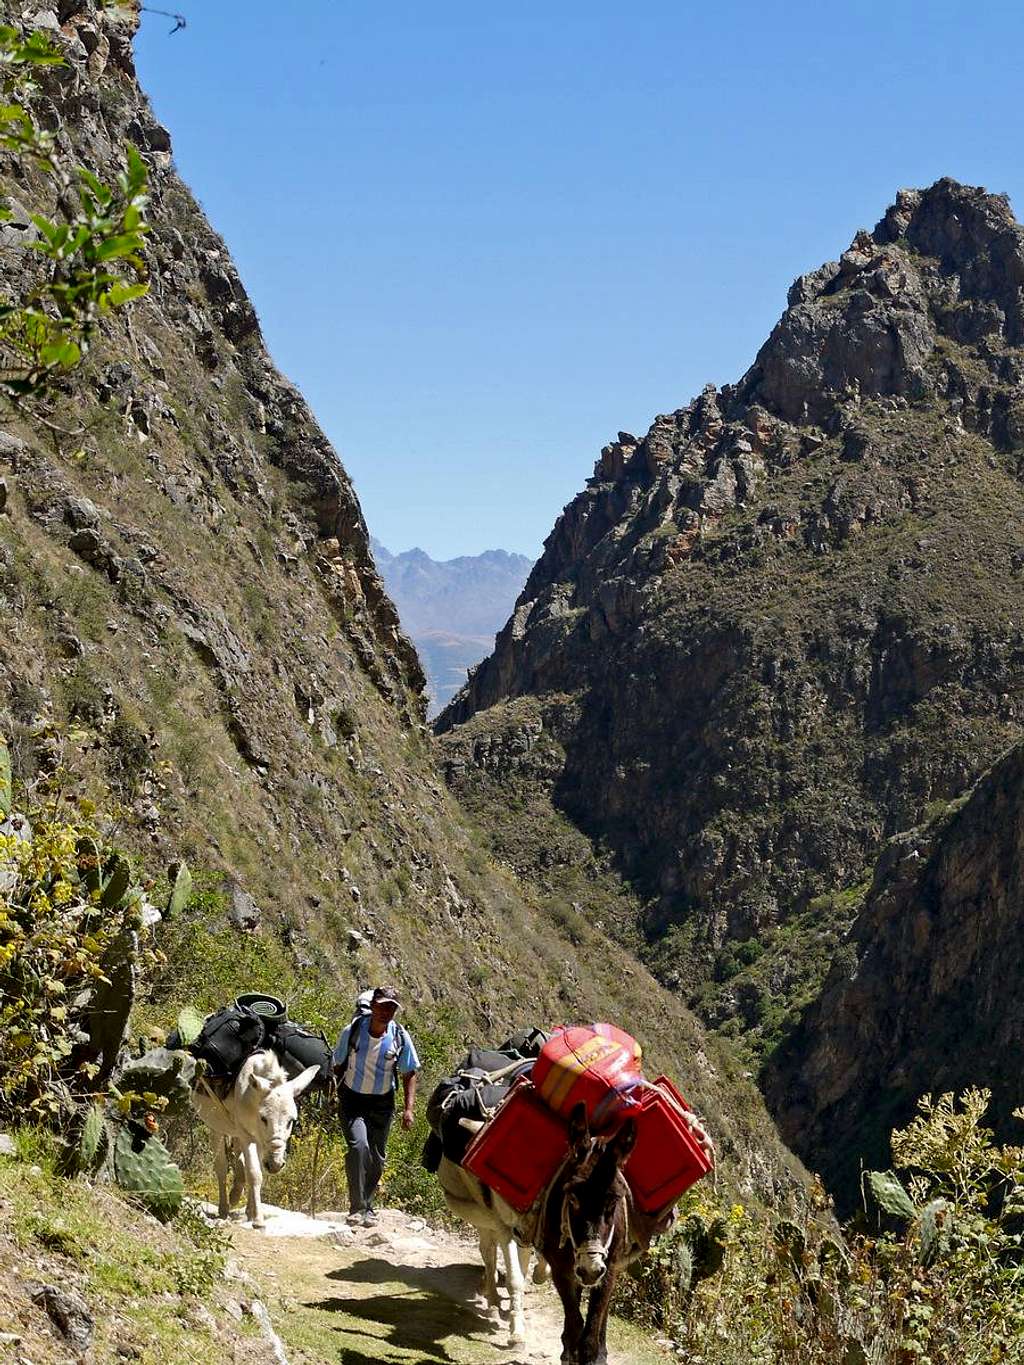 Our Porter with the Donkey's Hiking